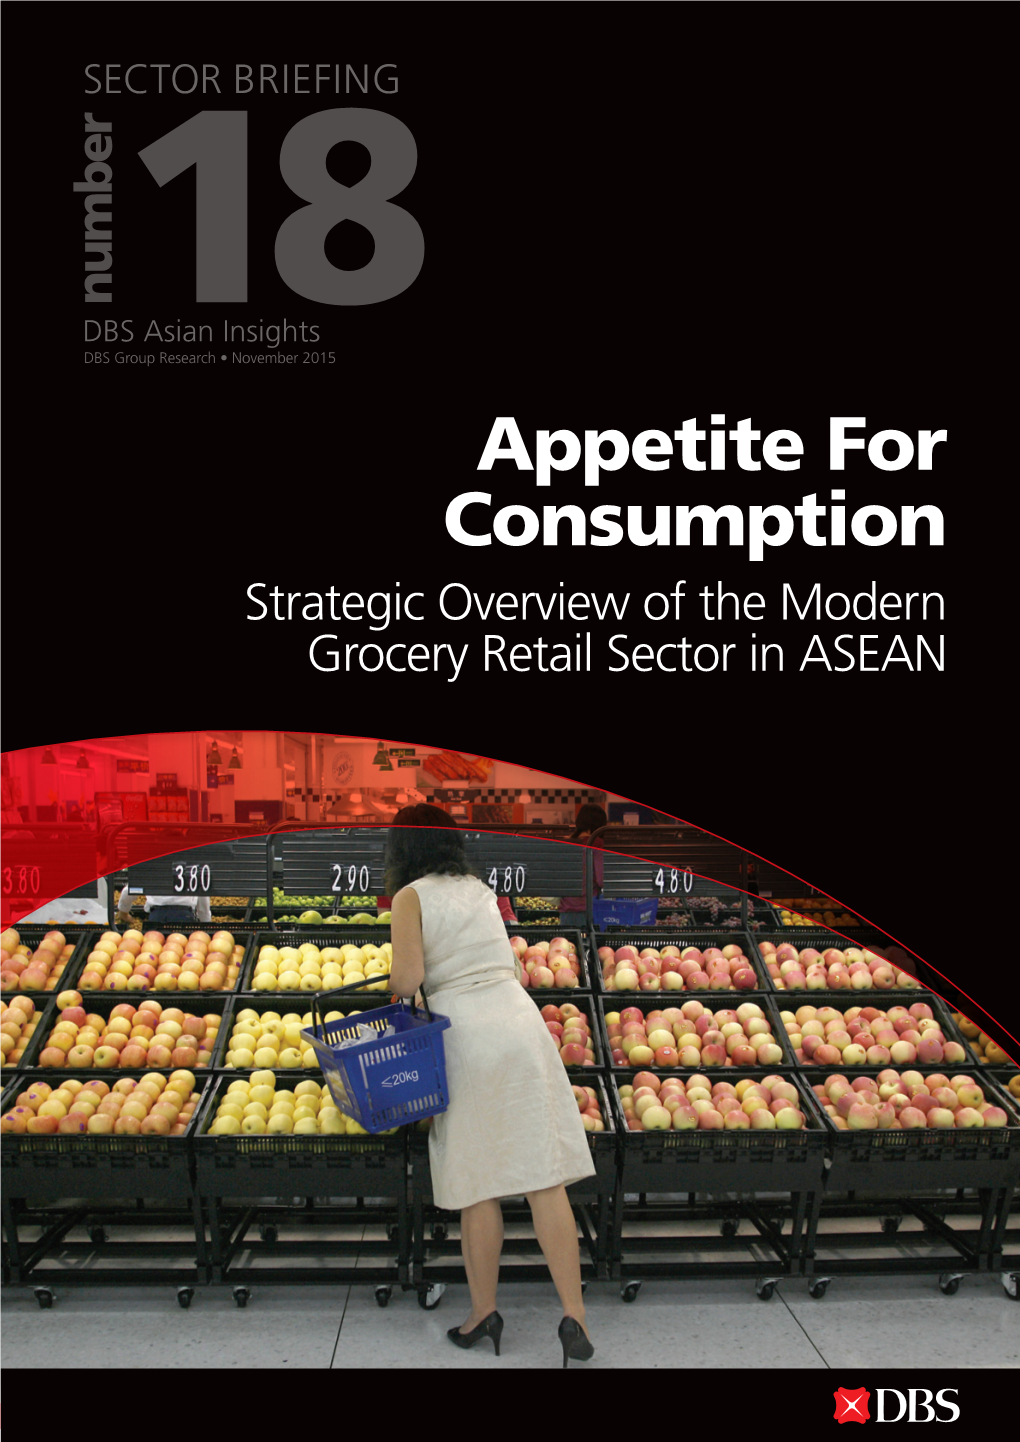 Appetite for Consumption Strategic Overview of the Modern Grocery Retail Sector in ASEAN DBS Asian Insights SECTOR BRIEFING 18 02